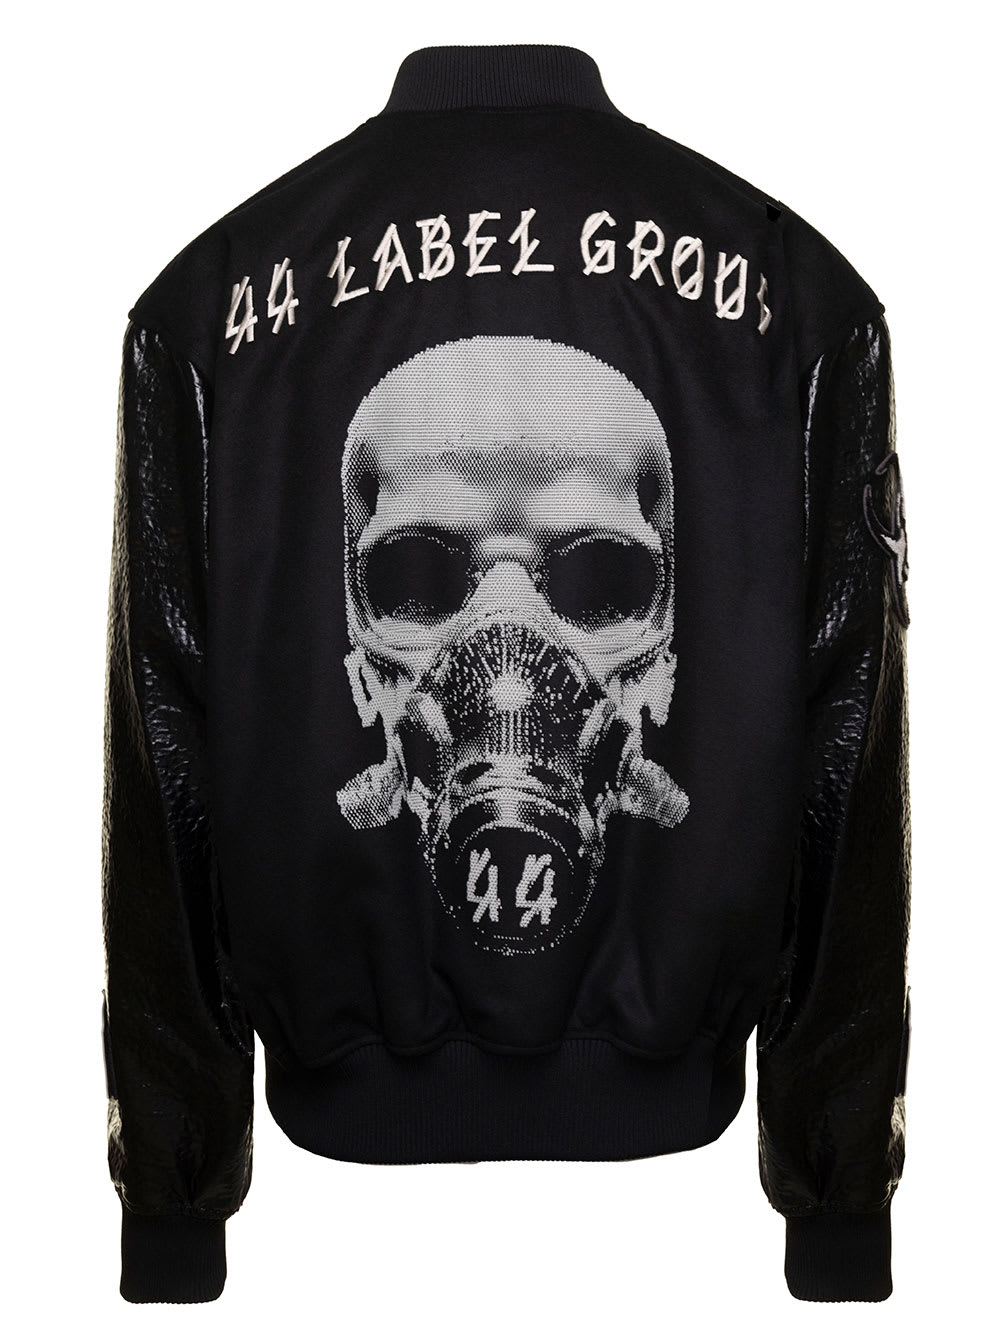 Shop 44 Label Group Black Varsity Jacket With Faux Leather Sleeves And Logo Patch Man